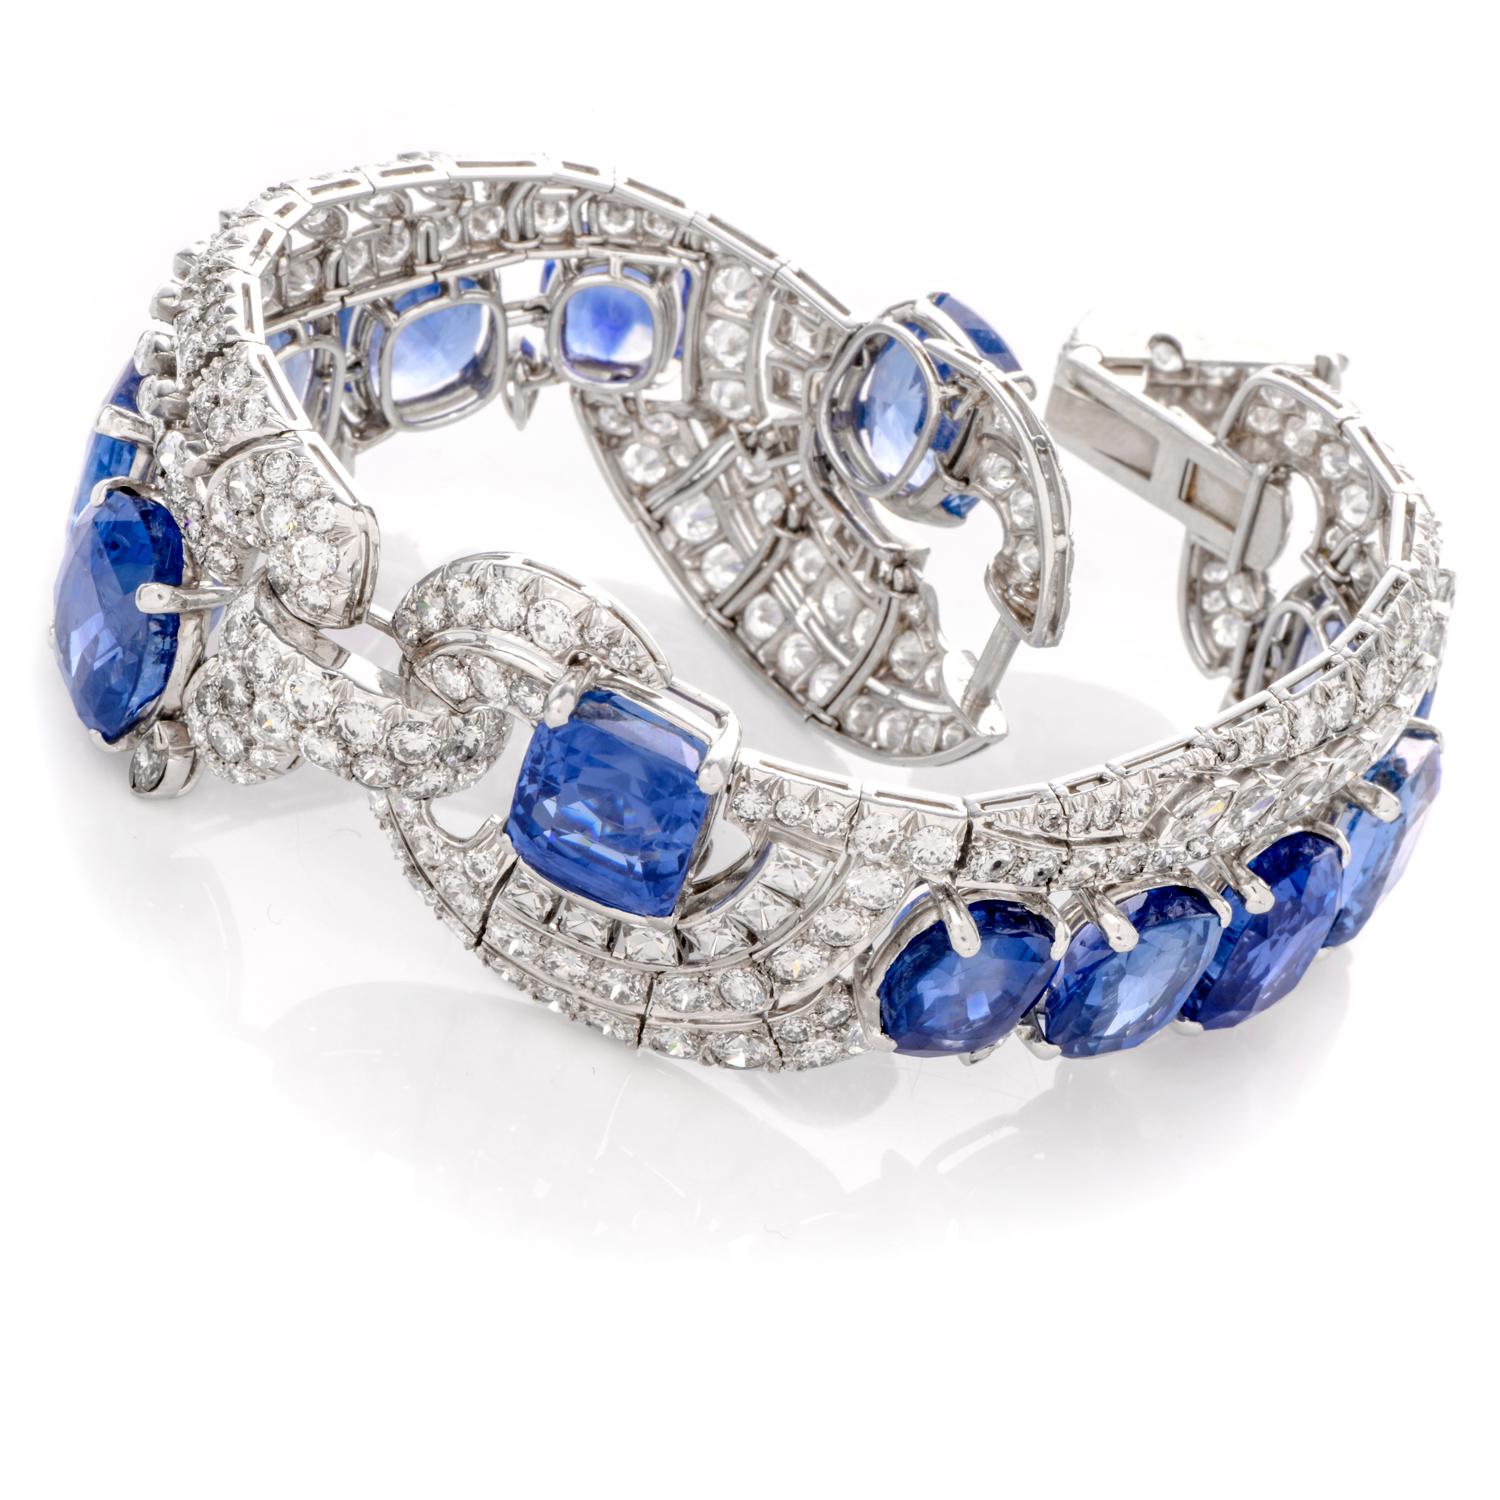 Feel like a Queen!

This one-of-a-kind stunning Sapphire and Diamond bracelet was inspired by an

Unbridled Imagination of the Jewels of the Nile and crafted in Luxurious Platinum.

This statement piece features 12 stunning elongated Cushions shaped